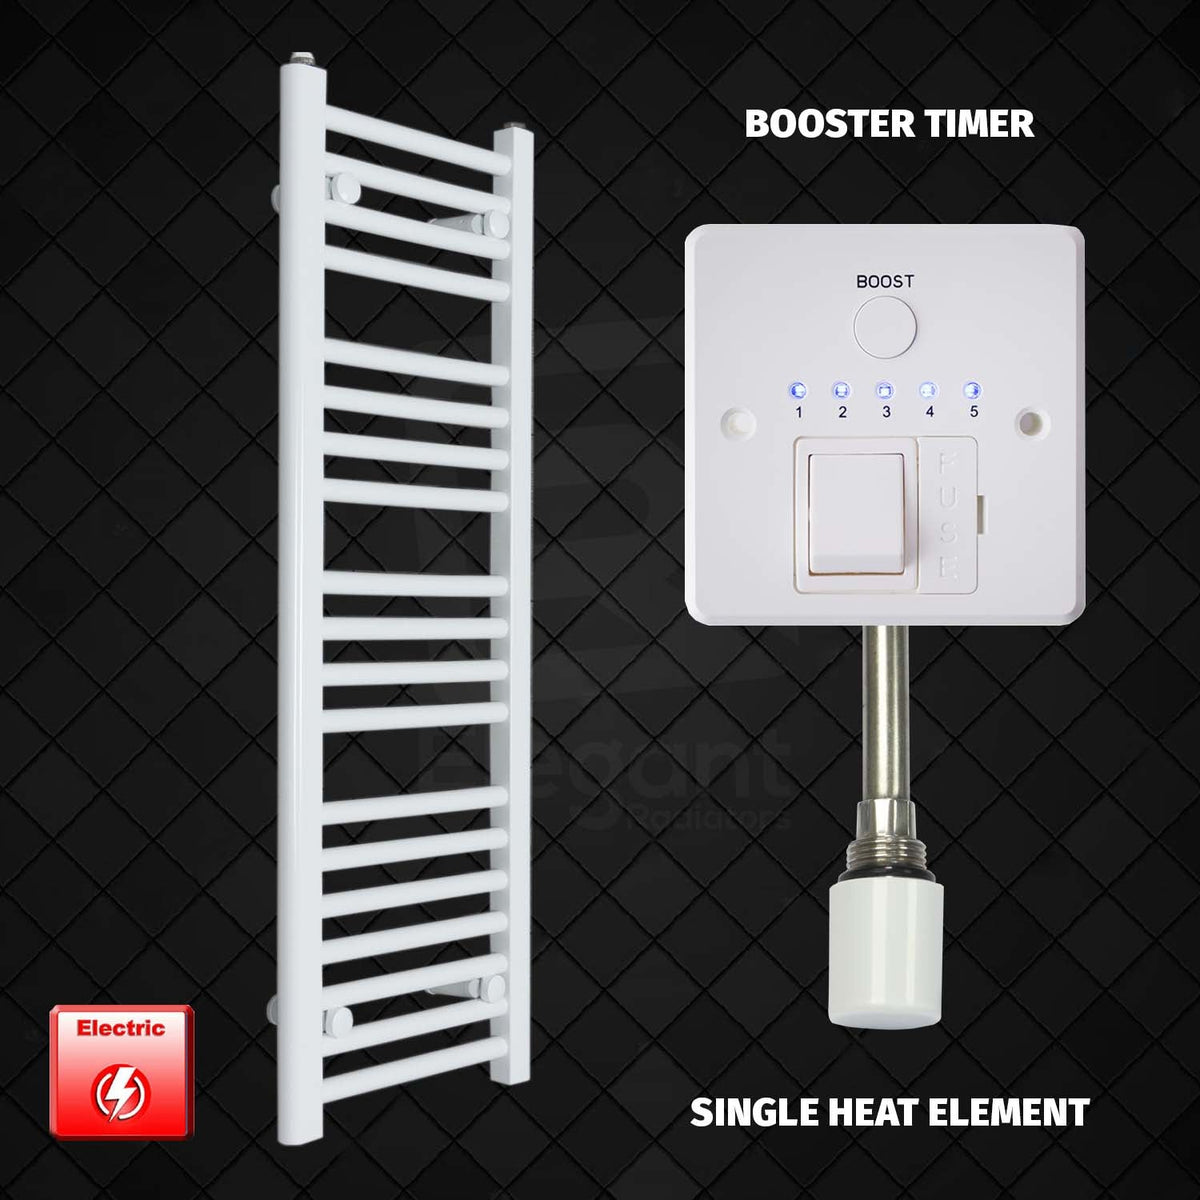 1000 mm High 400mm Wide Pre-Filled Electric Heated Towel Rail Radiator White Booster Timer Single Heat Element